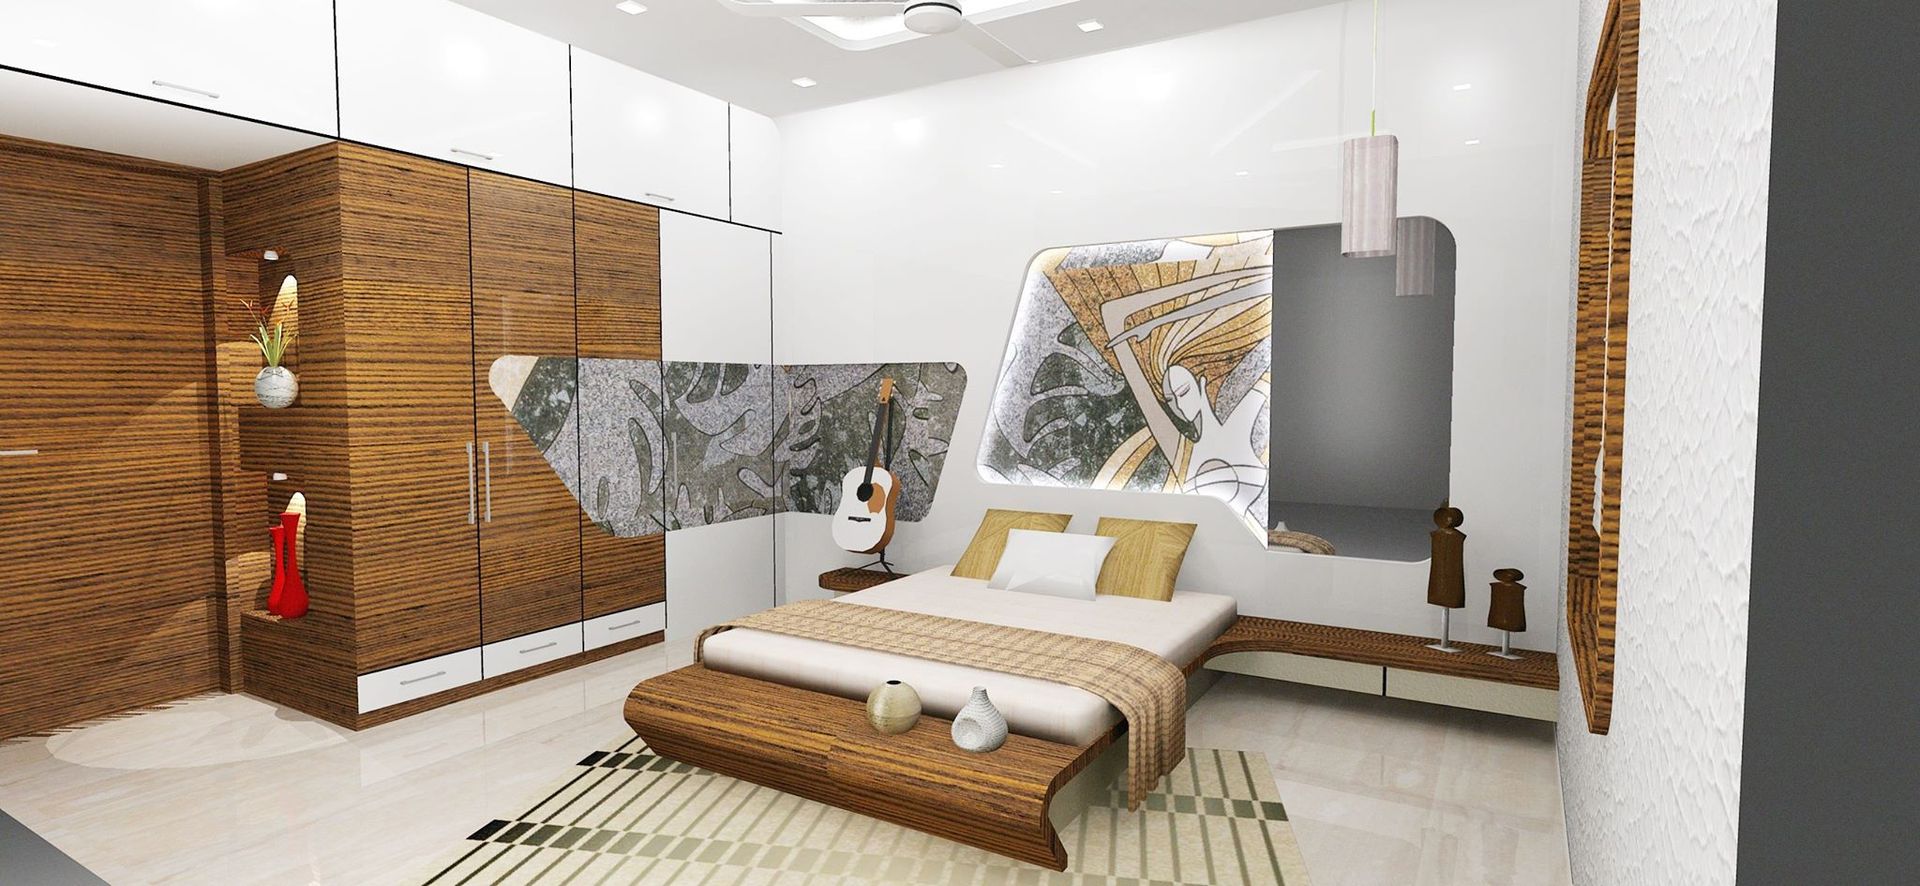 Bedroom Designs, Archsmith project consultant Archsmith project consultant Modern style bedroom